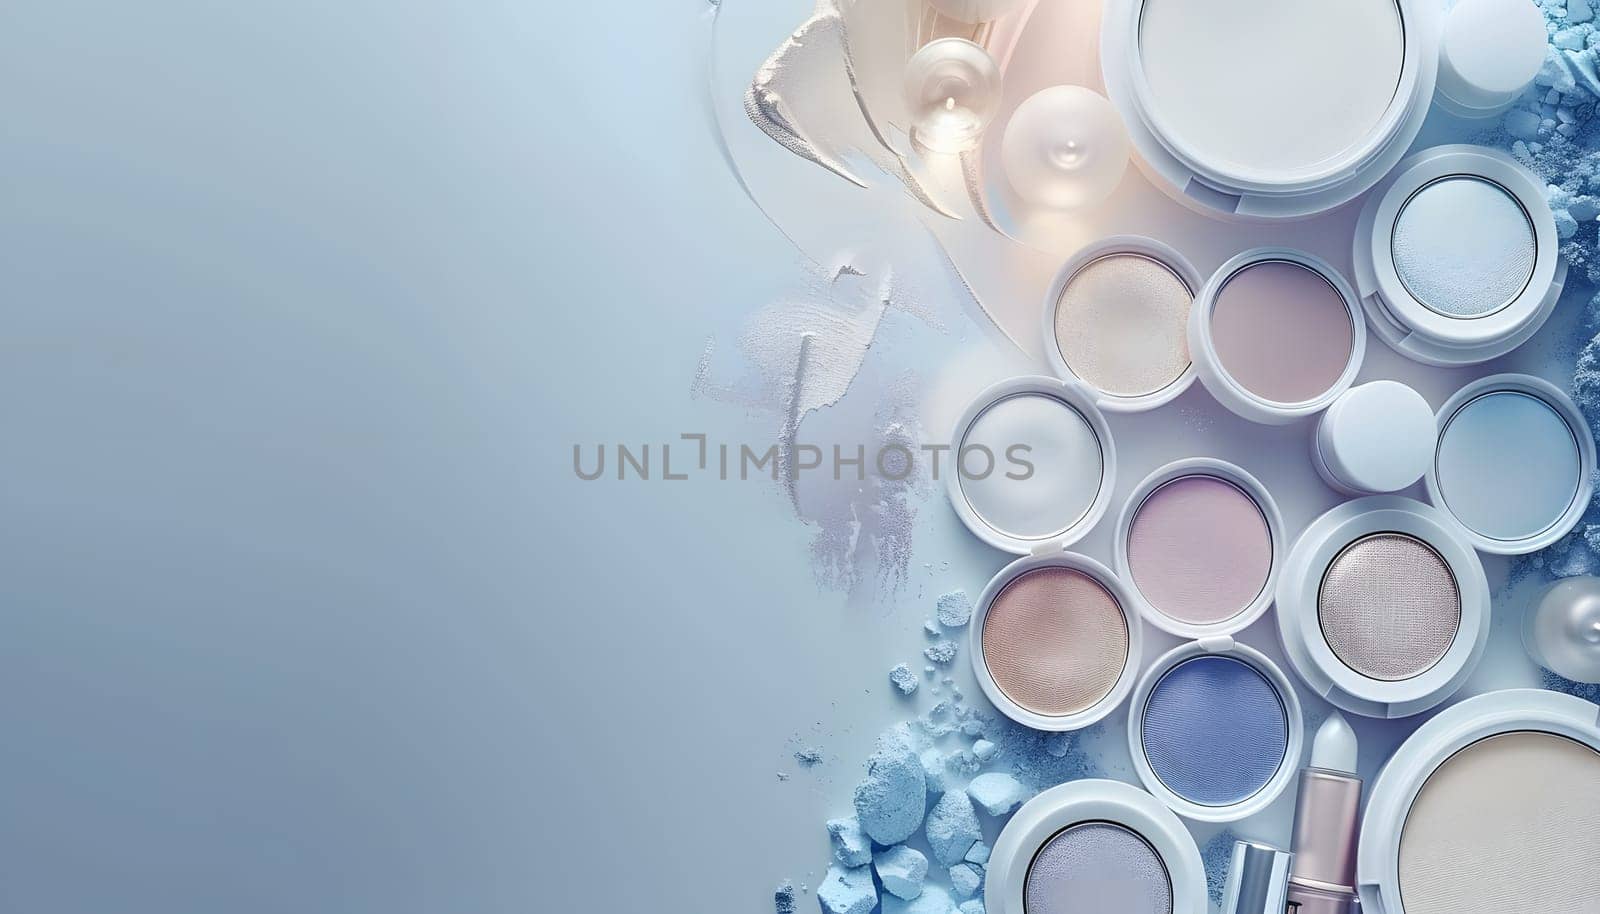 A collection of liquid and waterbased makeup products displayed on a blue background, featuring vision care items, finger application tools, transparent materials, and electric blue accents